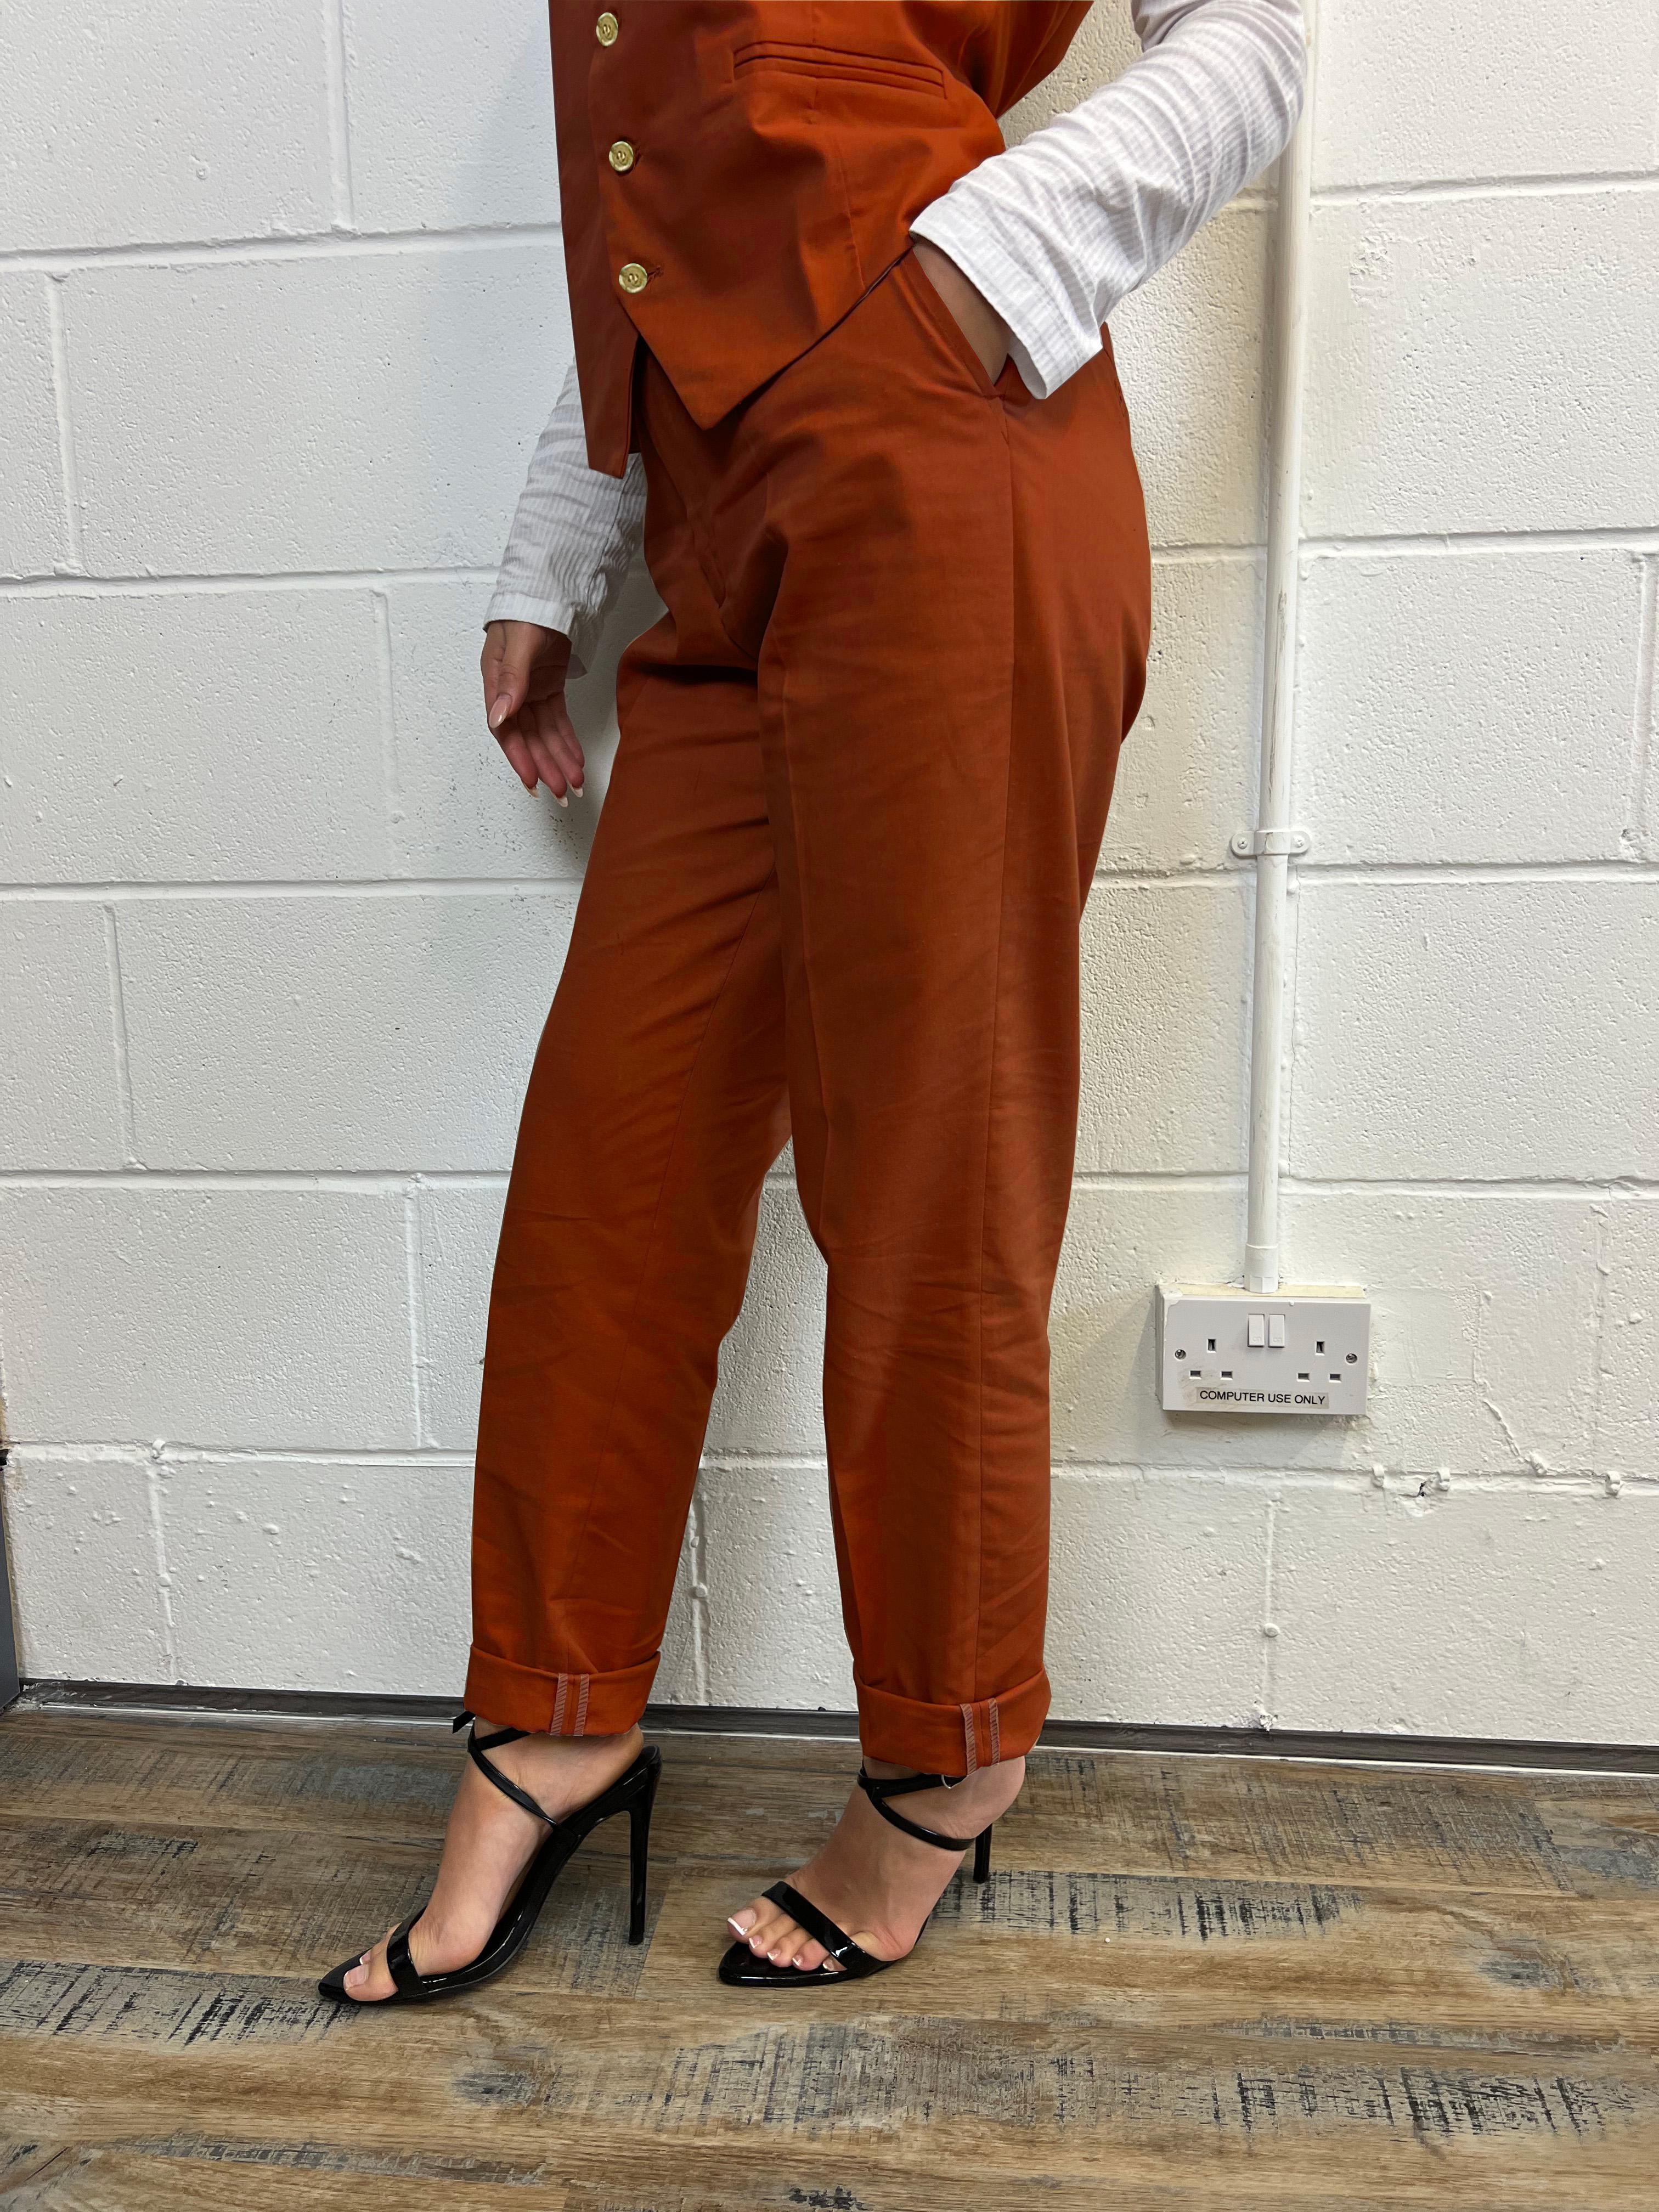 Buy Women's Orange Solid Trousers (S) at Amazon.in